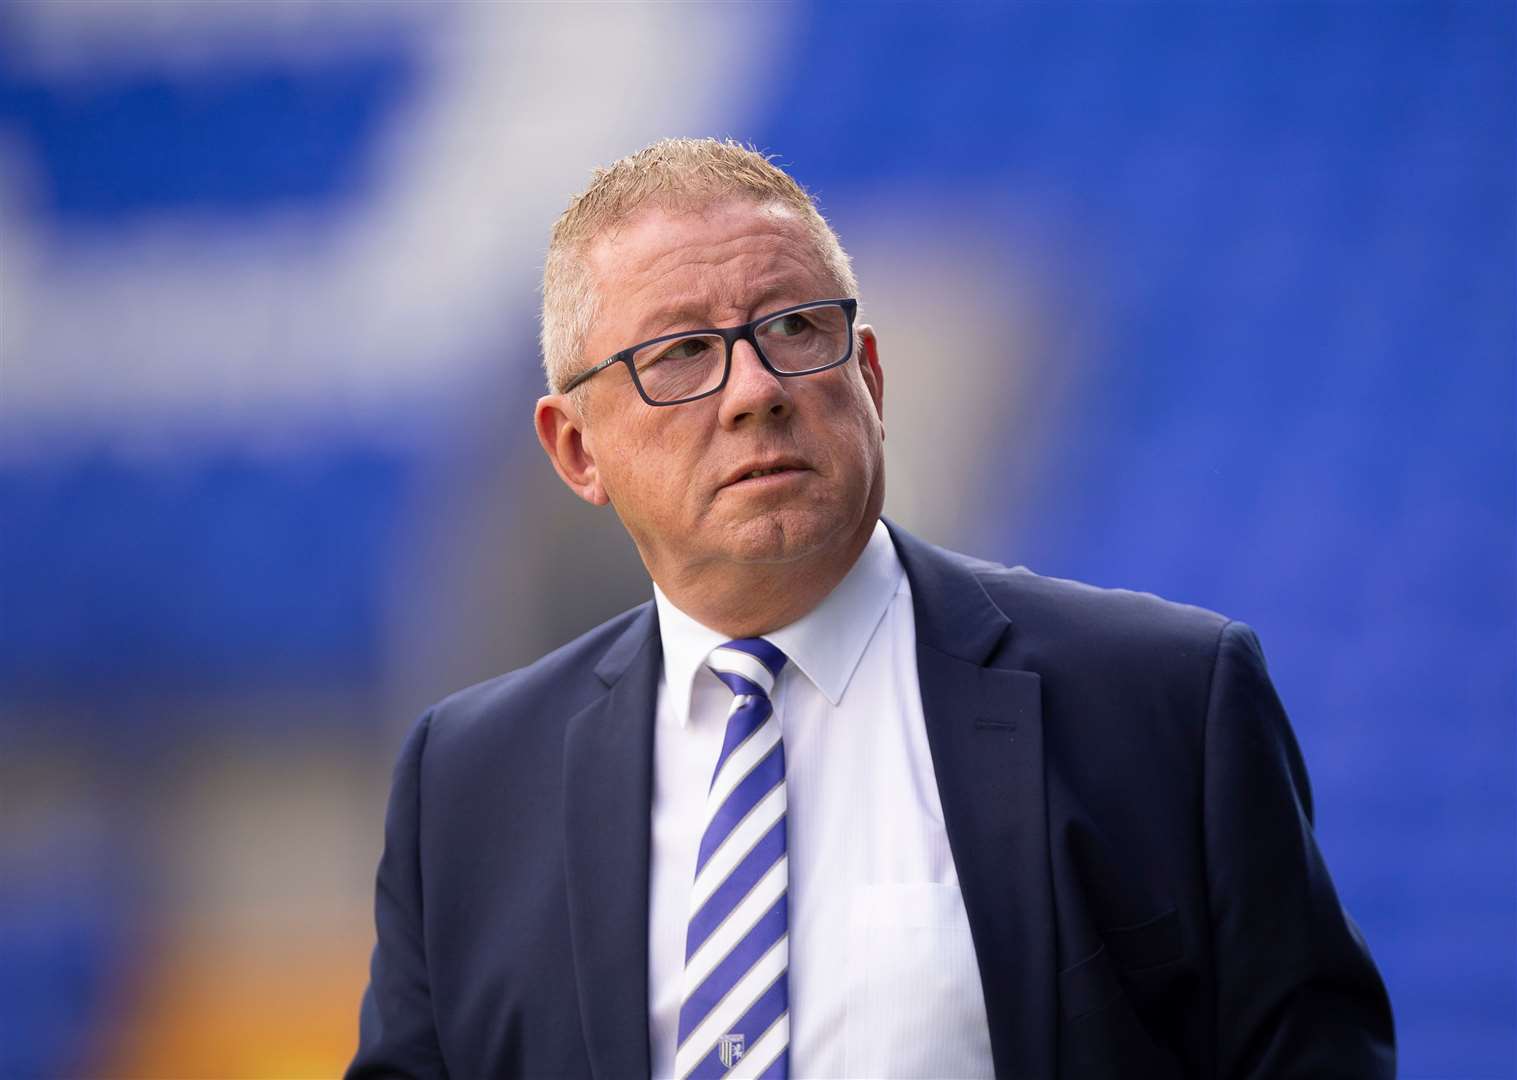 Gillingham chairman Paul Scally reacts to protests over his running of the club